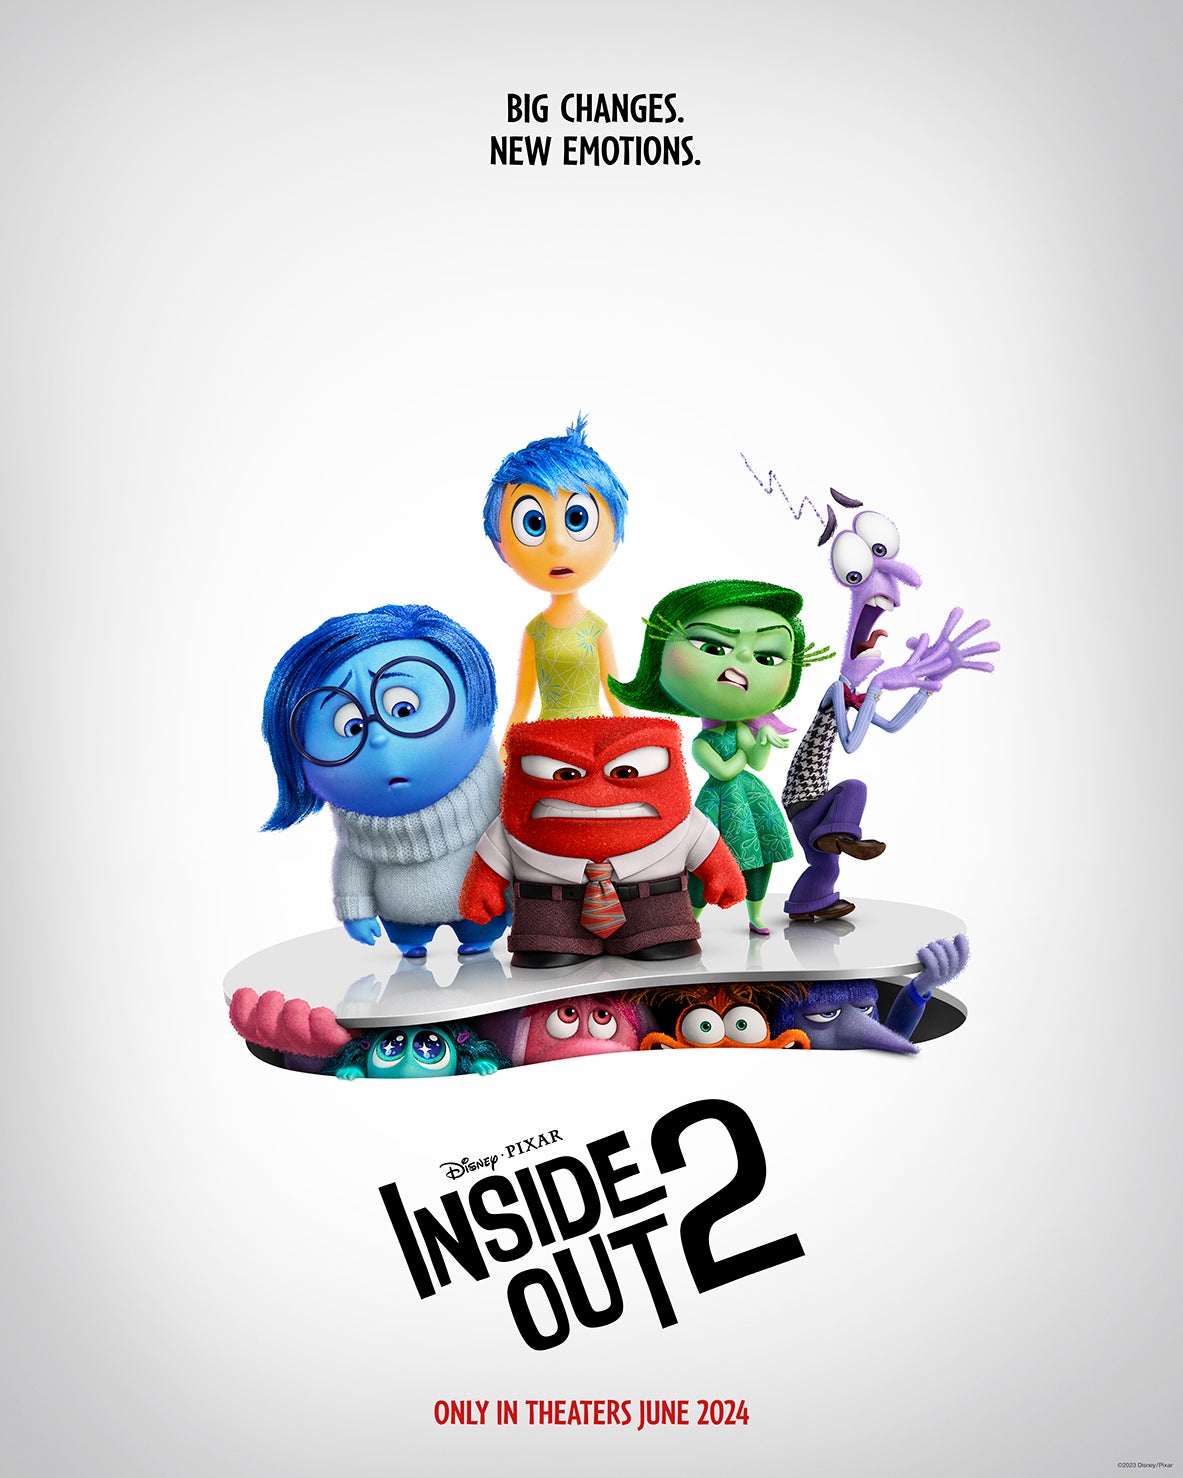 inside out 2 trailer reveals first look at new emotion